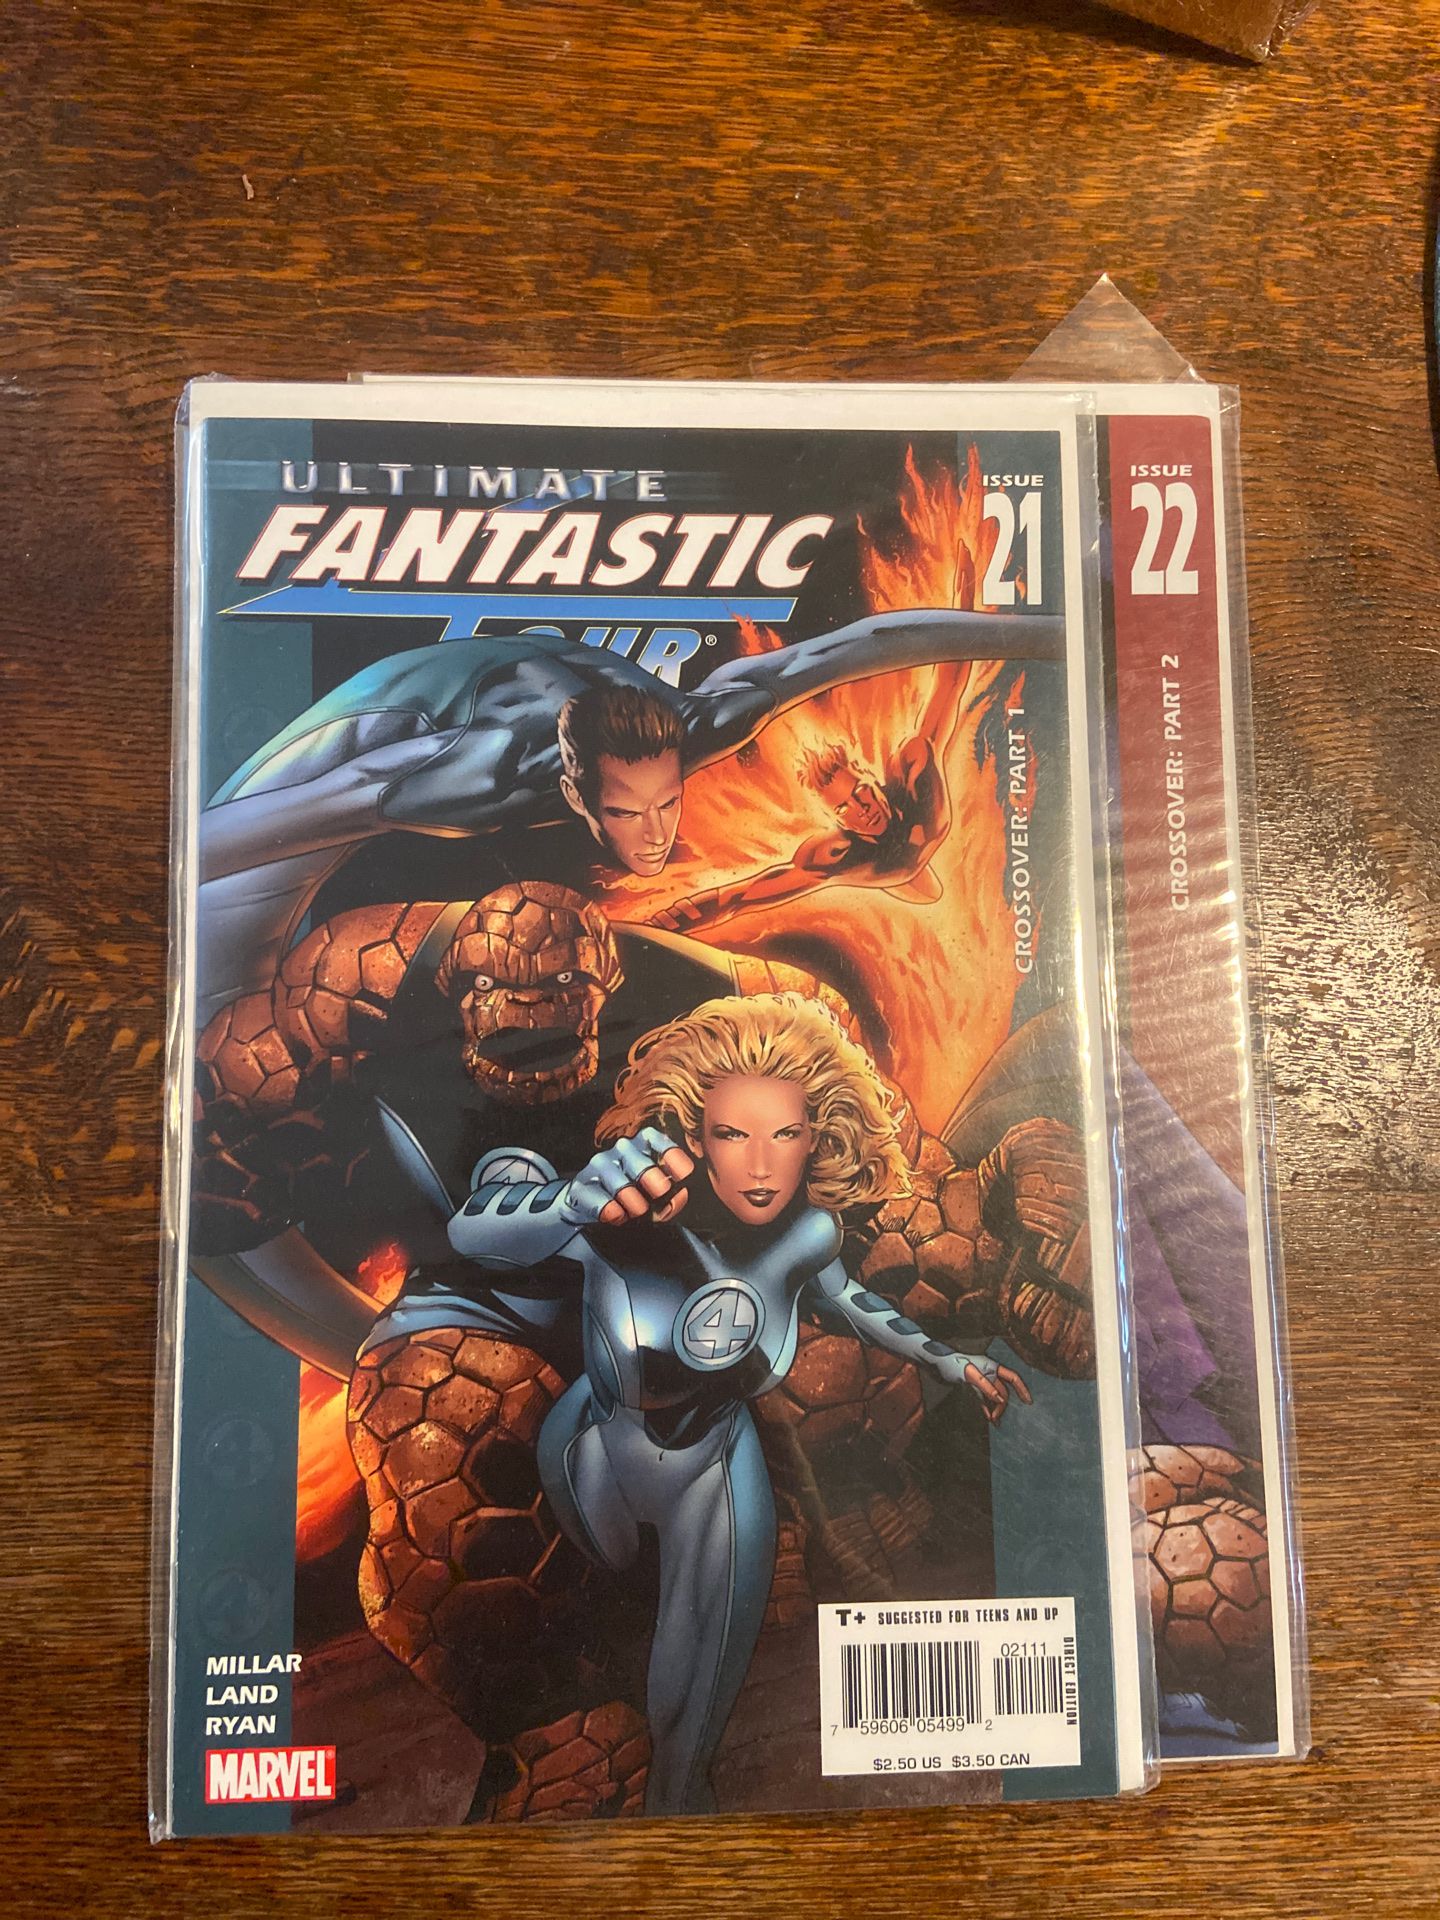 Ultimate Fantastic Four 21-22 Marvel comics first Marvel Zombies